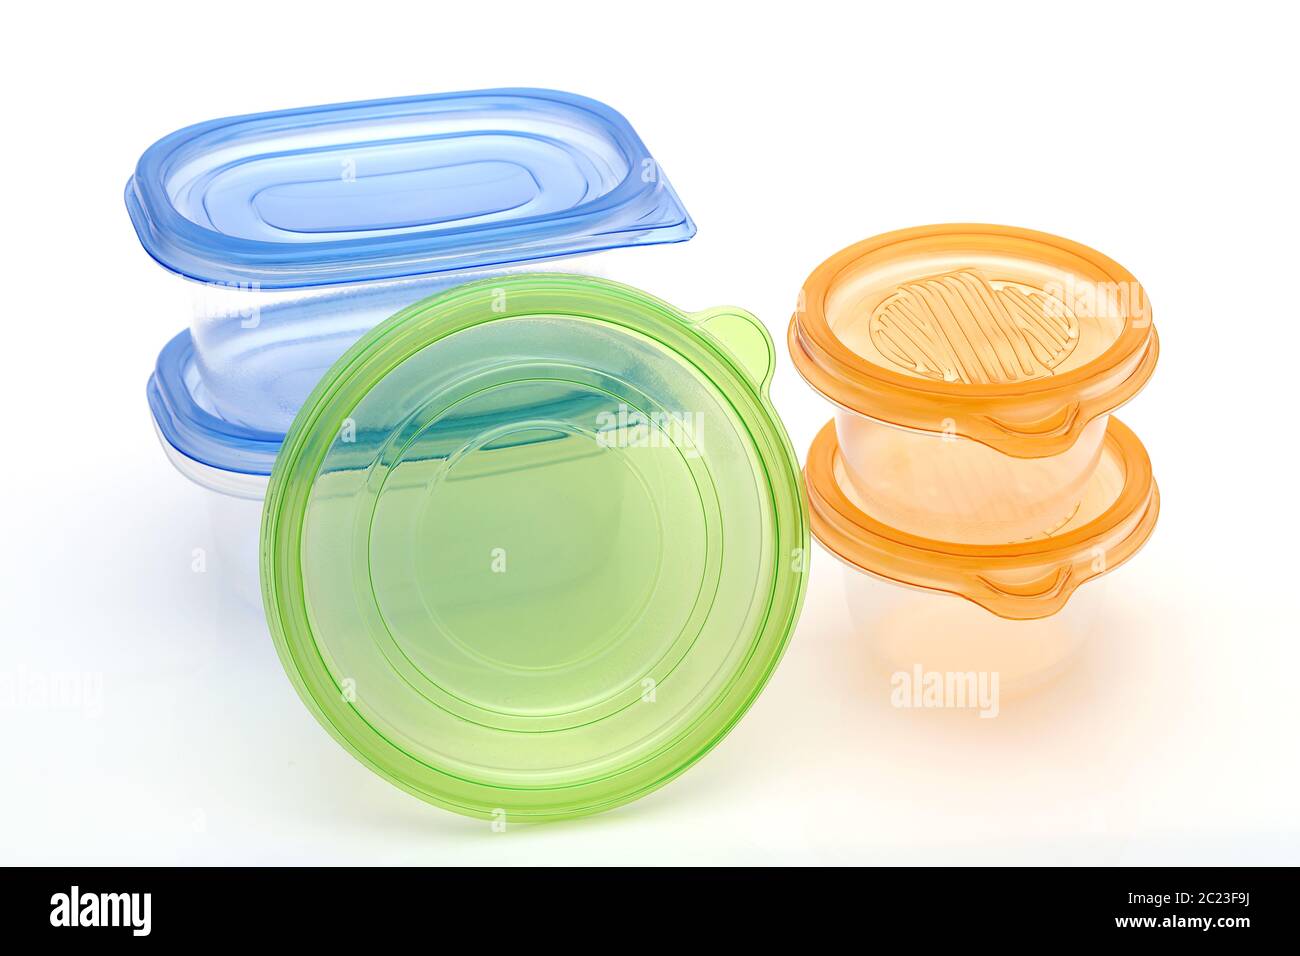 https://c8.alamy.com/comp/2C23F9J/stack-of-food-plastic-containers-isolated-on-white-background-2C23F9J.jpg